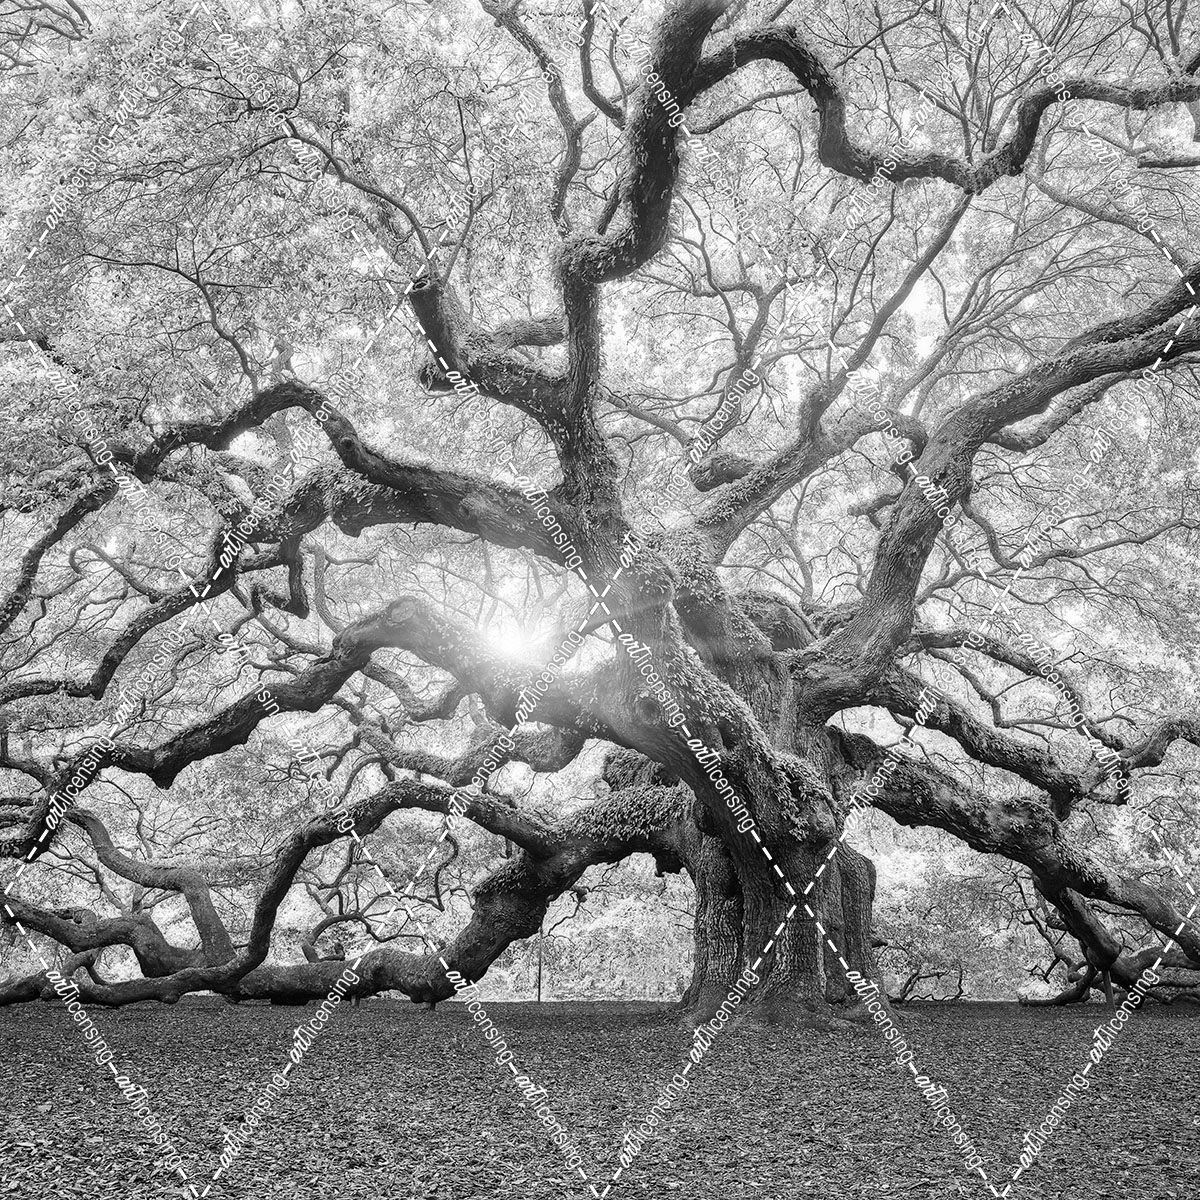 The Tree Square-BW 2